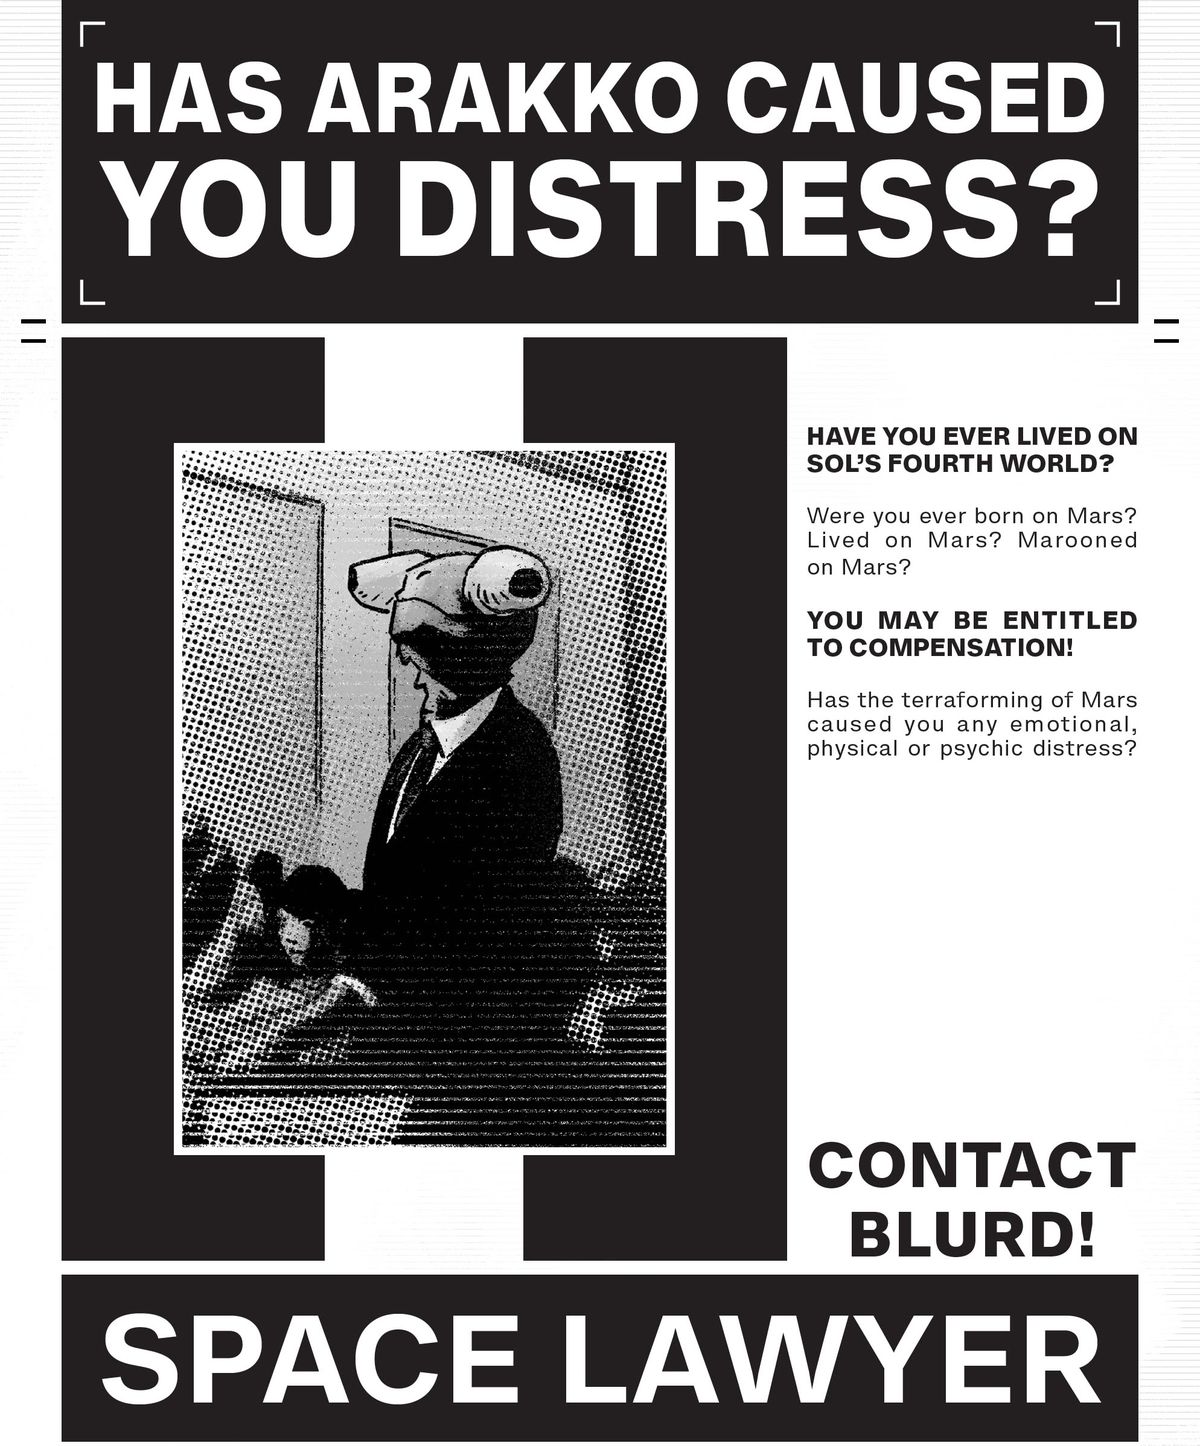 “Has Arakko caused you distress? YOU MAY BE ENTITLED TO COMPENSATION! CONTACT BLURD! SPACE LAWYER” says an advertisement for the alien lizard lawyer Murd Blurdock in X-Men #1 (2021). 